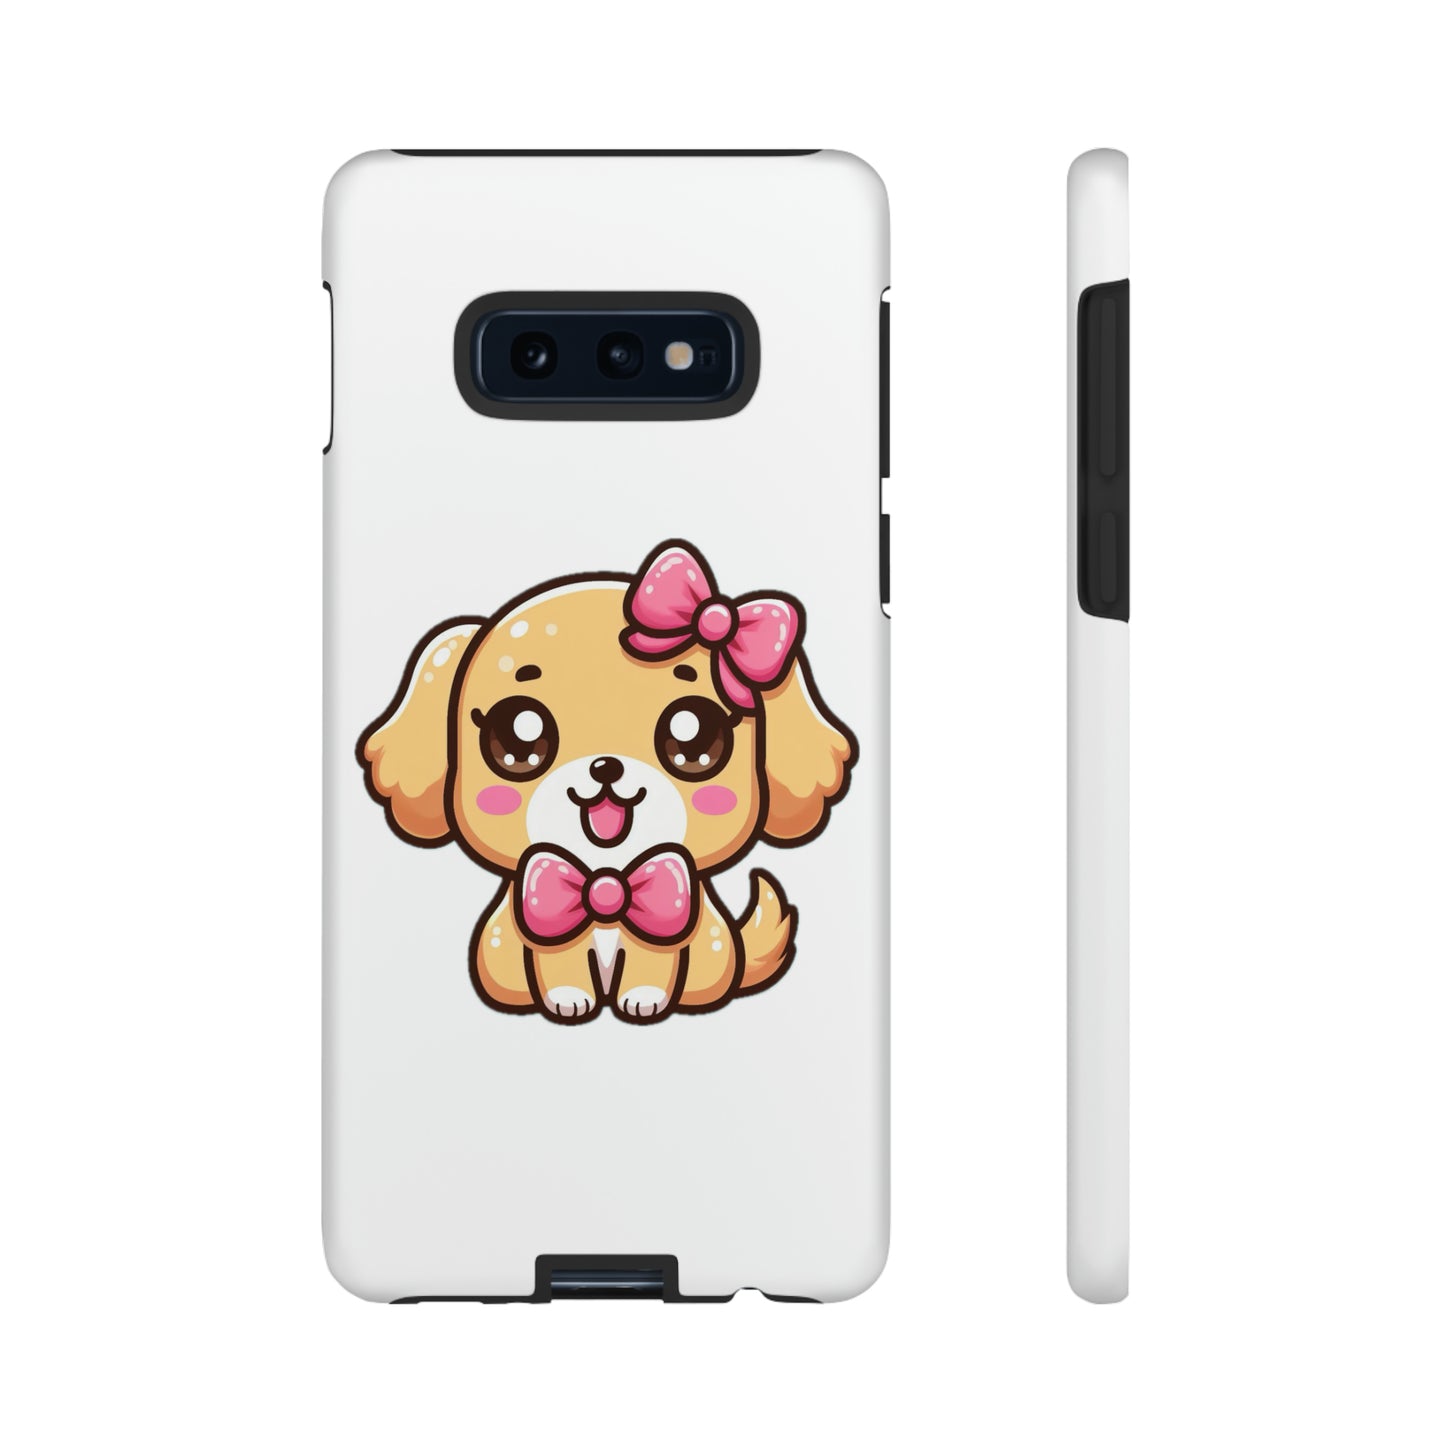 Adorable Kawaii Golden Labrador Retriever Puppy Phone Case with Pink Bow - Perfect Gift for Dog Lovers